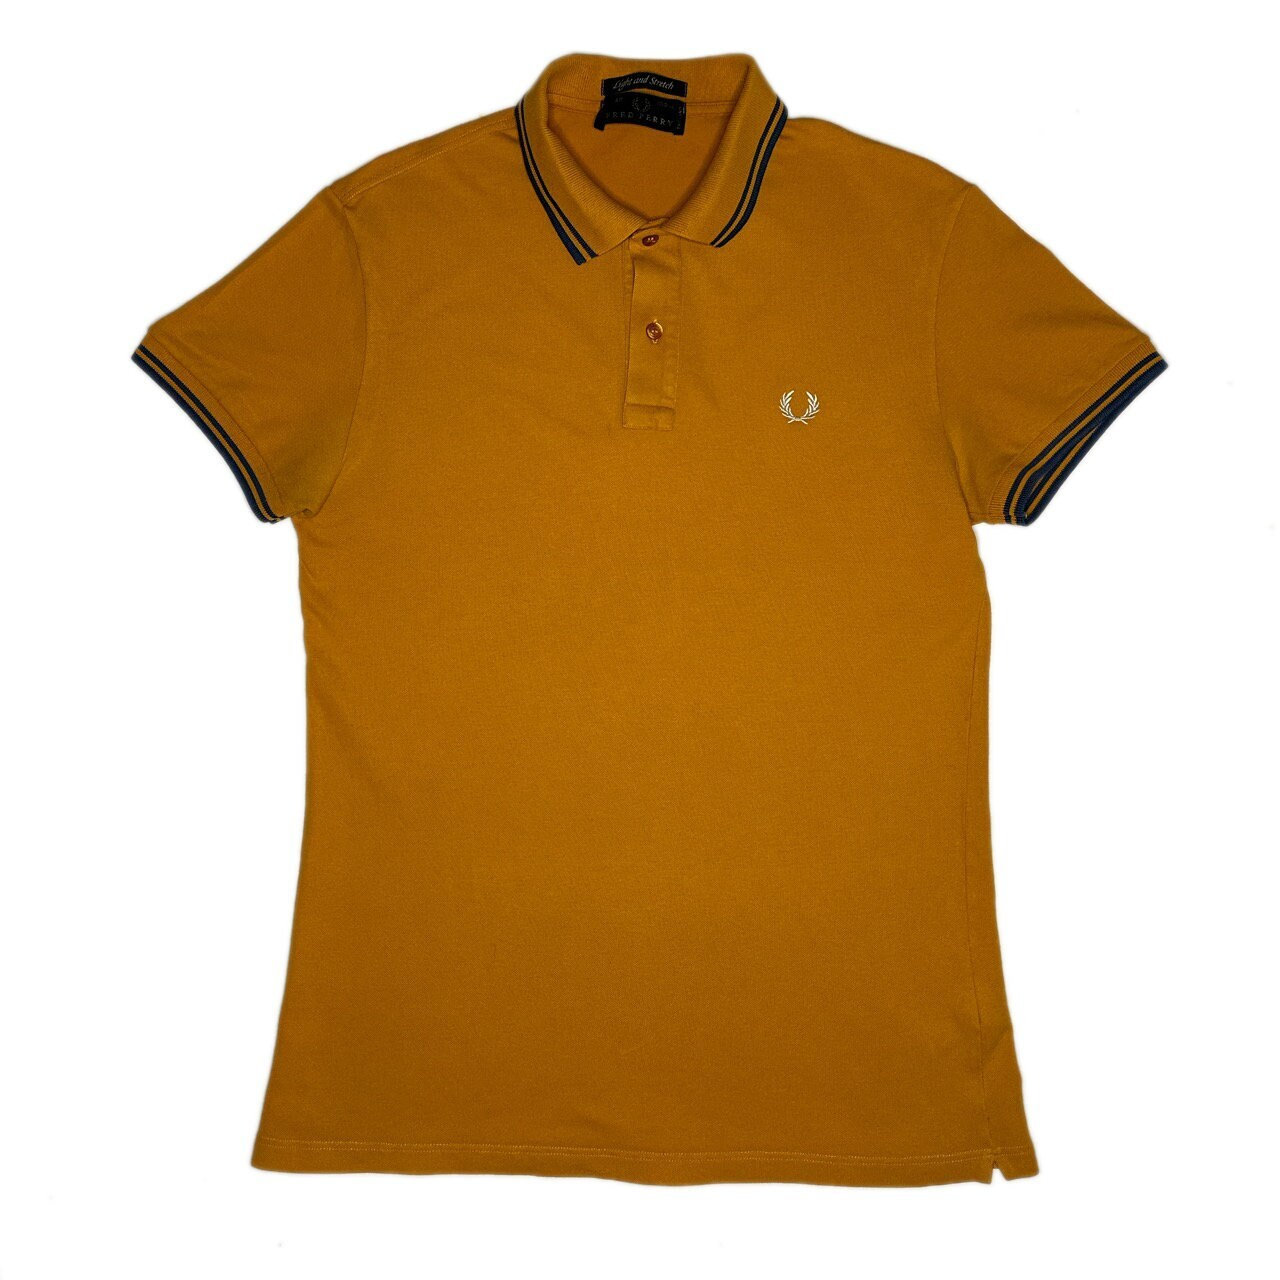 Fred perry Paris 75004 - Acheter Polo Fred Perry Paris 75004 - Sac Fred  Perry pas cher -Blouson Fred Perry -PSG Ultras- Casuals